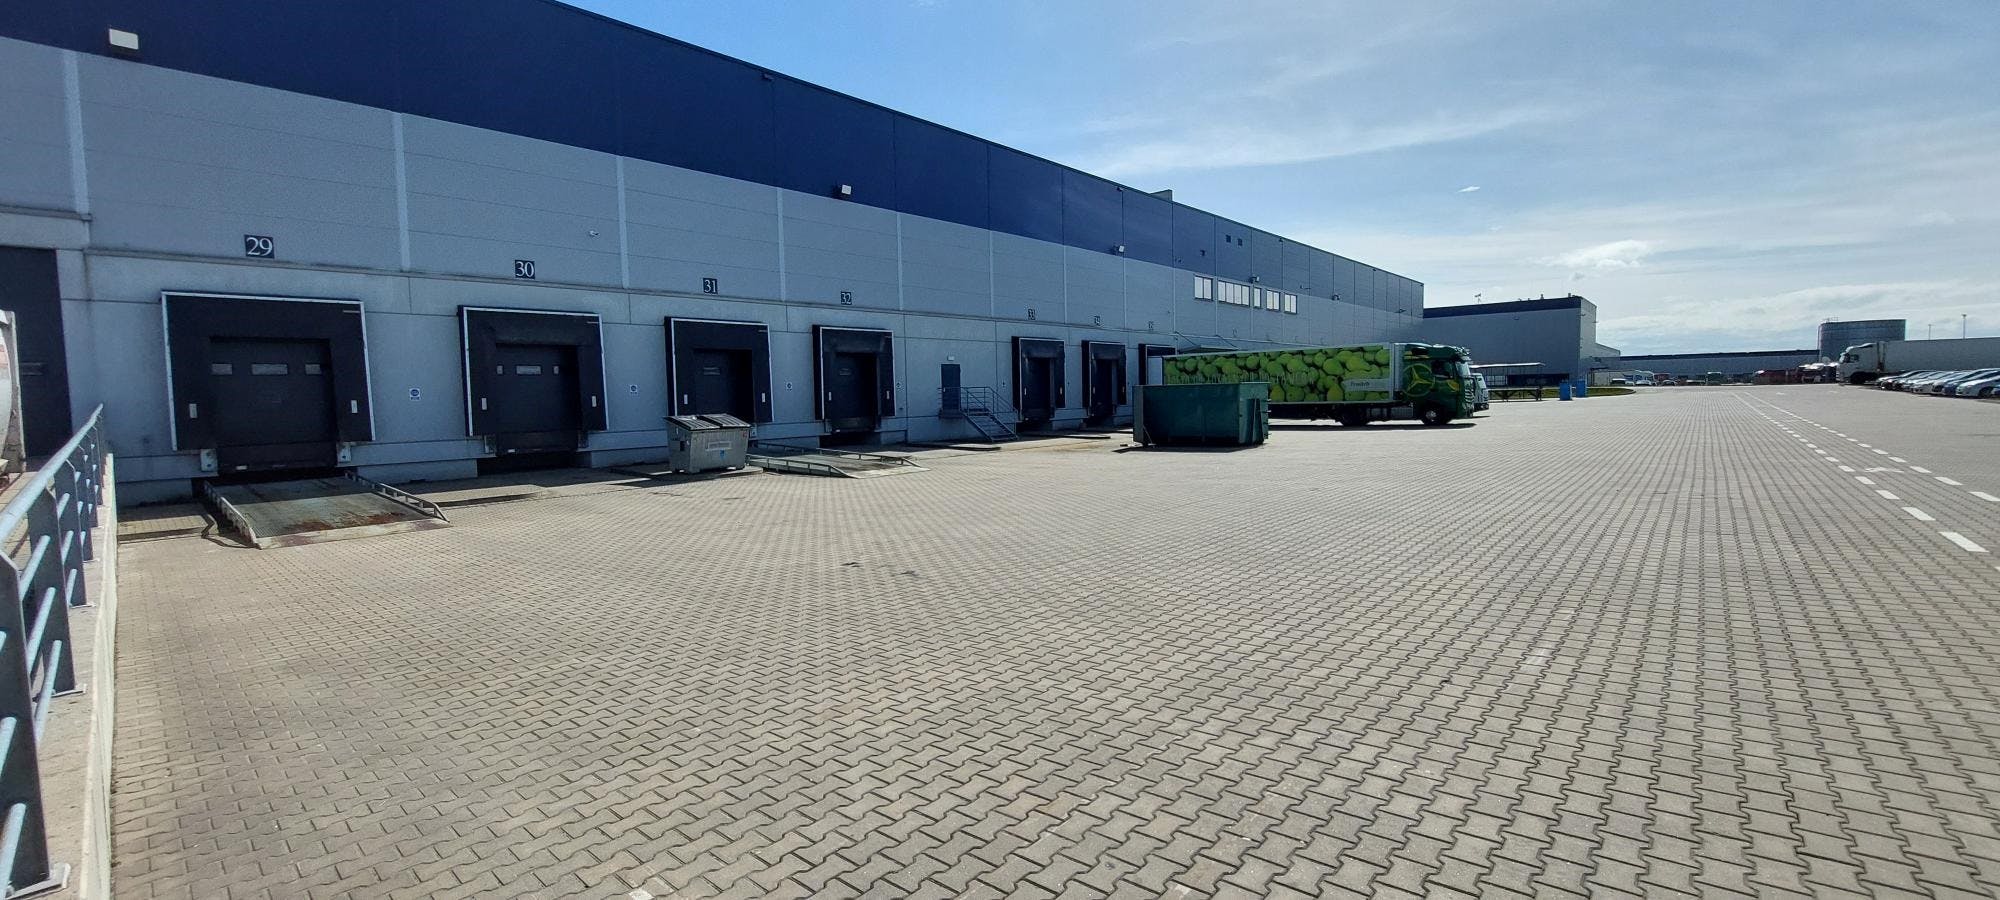 Warehouses for rent in Warehouses Budynek magazynowy Sosnowiec #2